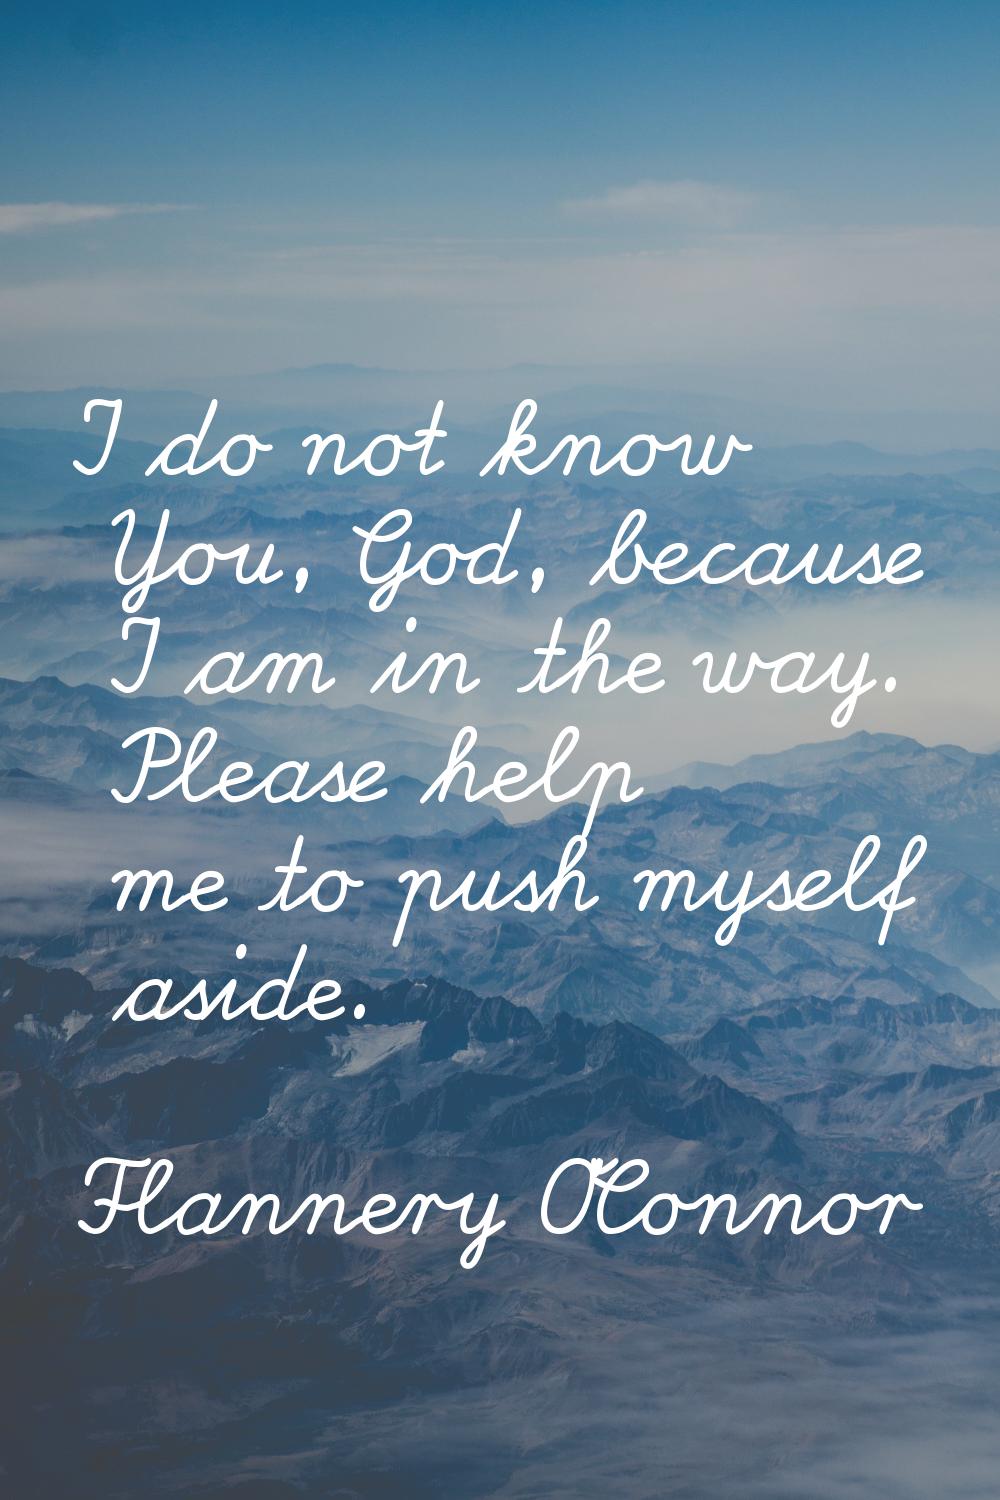 I do not know You, God, because I am in the way. Please help me to push myself aside.